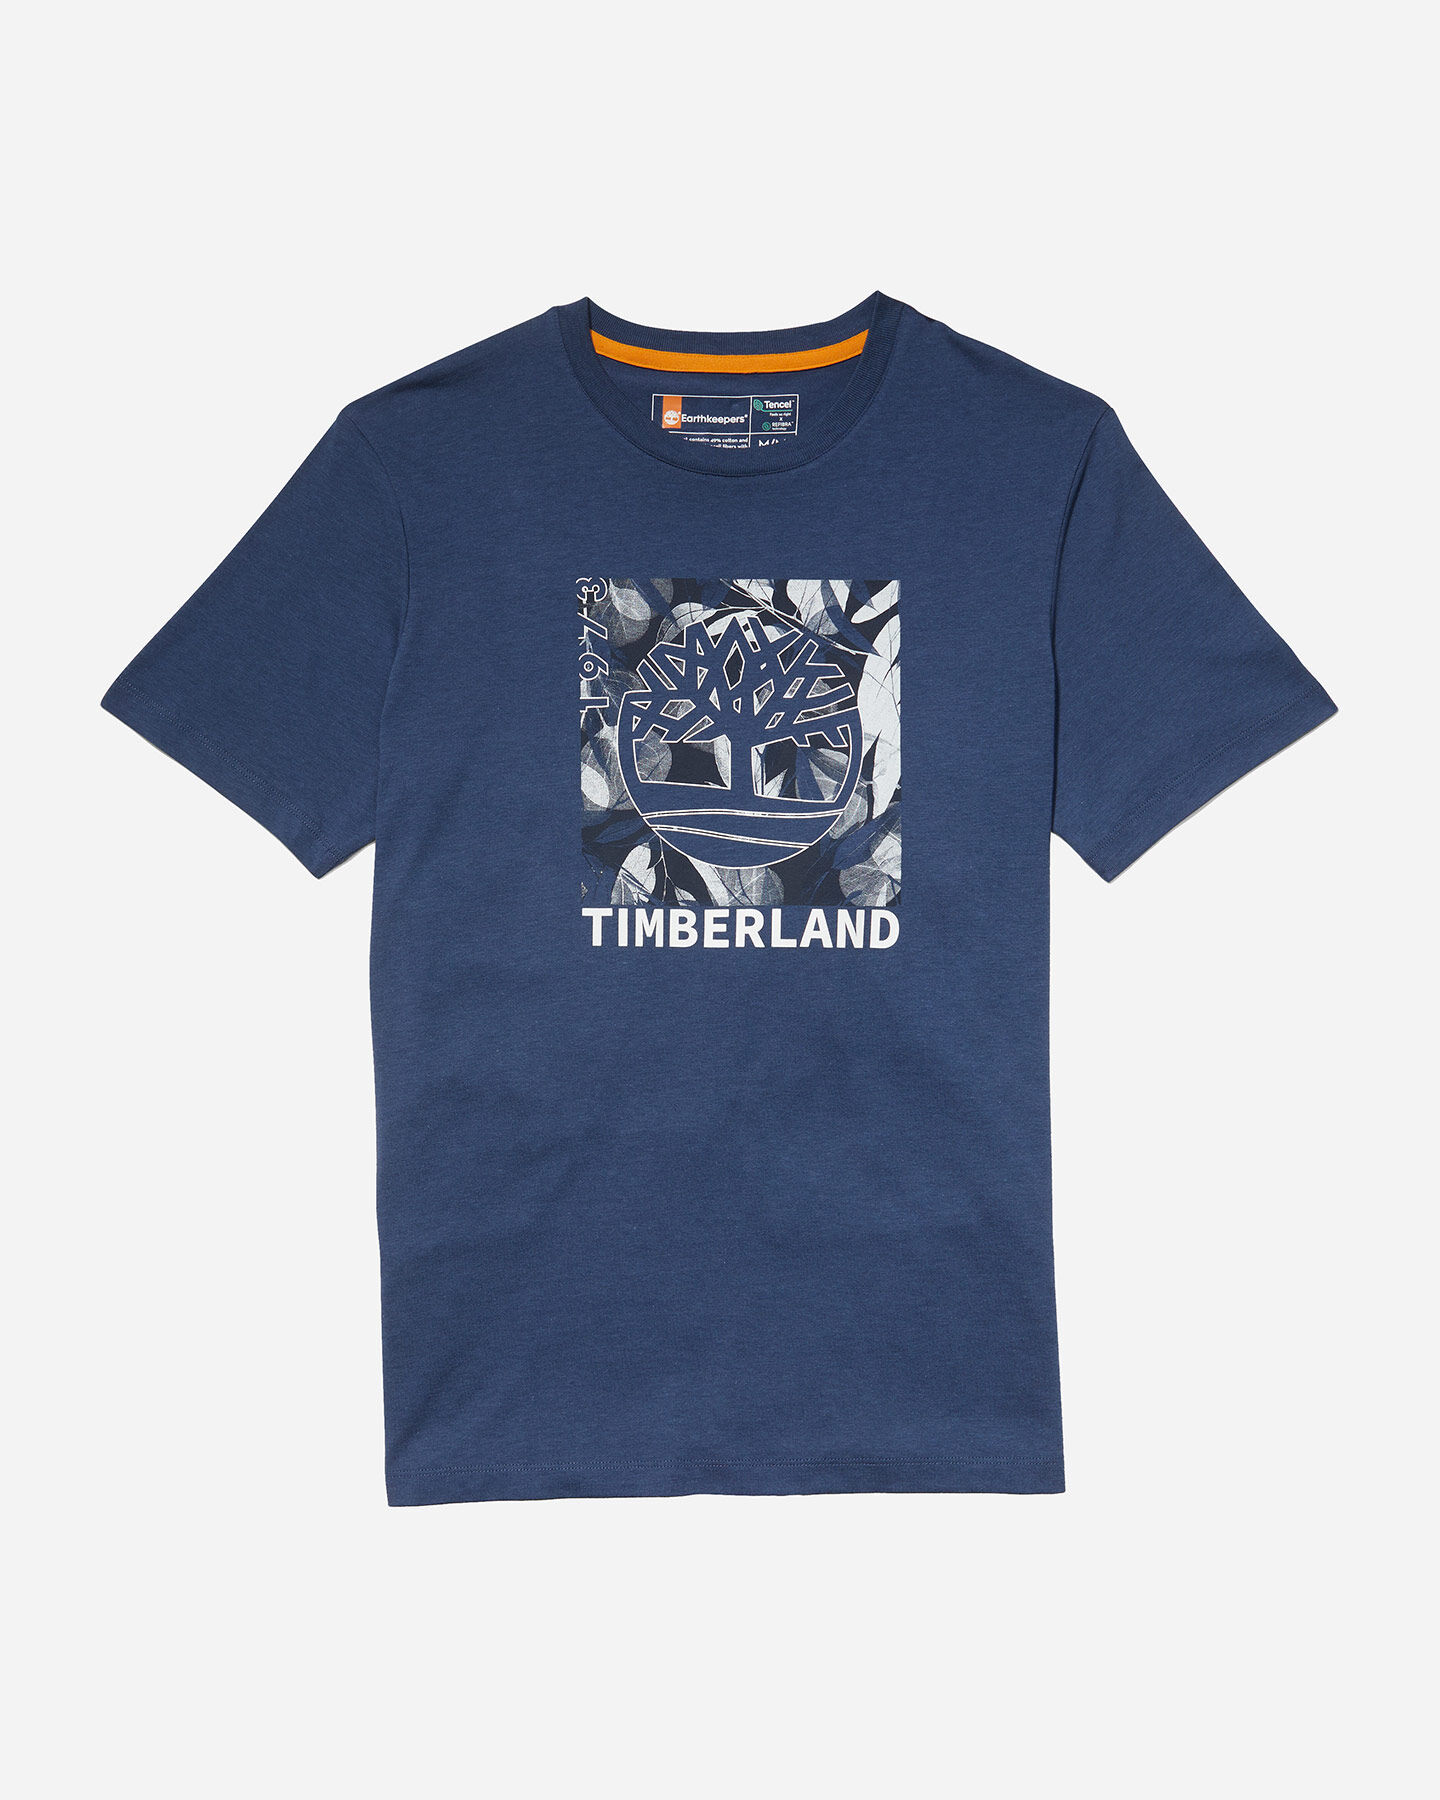  T-Shirt TIMBERLAND SUMMER M S4104767|2881|S scatto 5